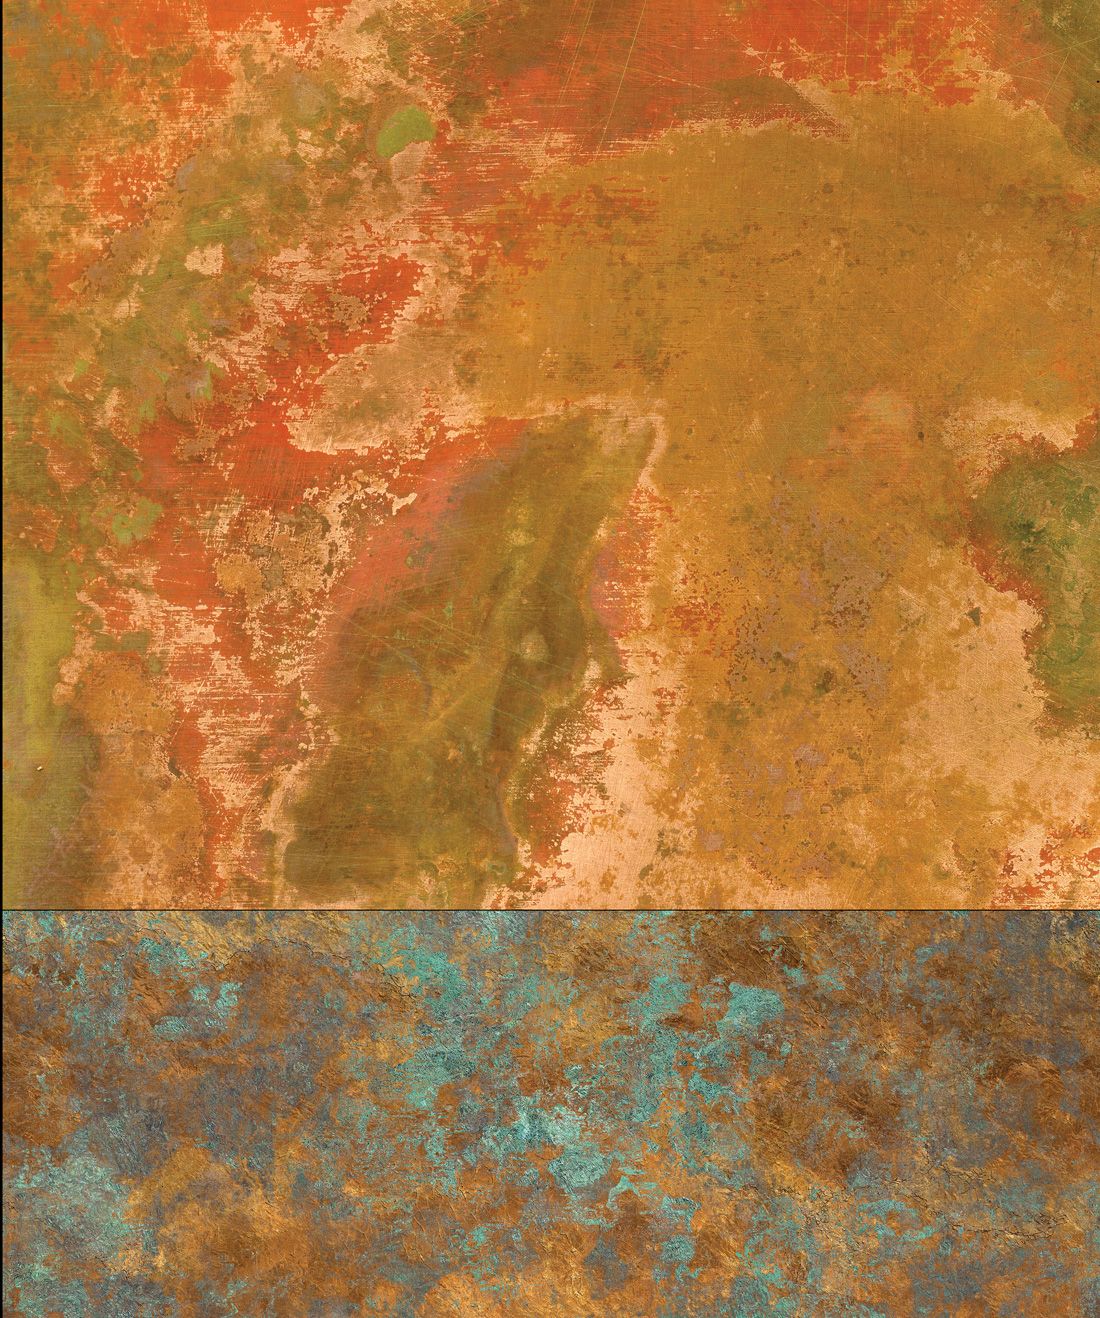 Bronze and copper is a metal wallpaper